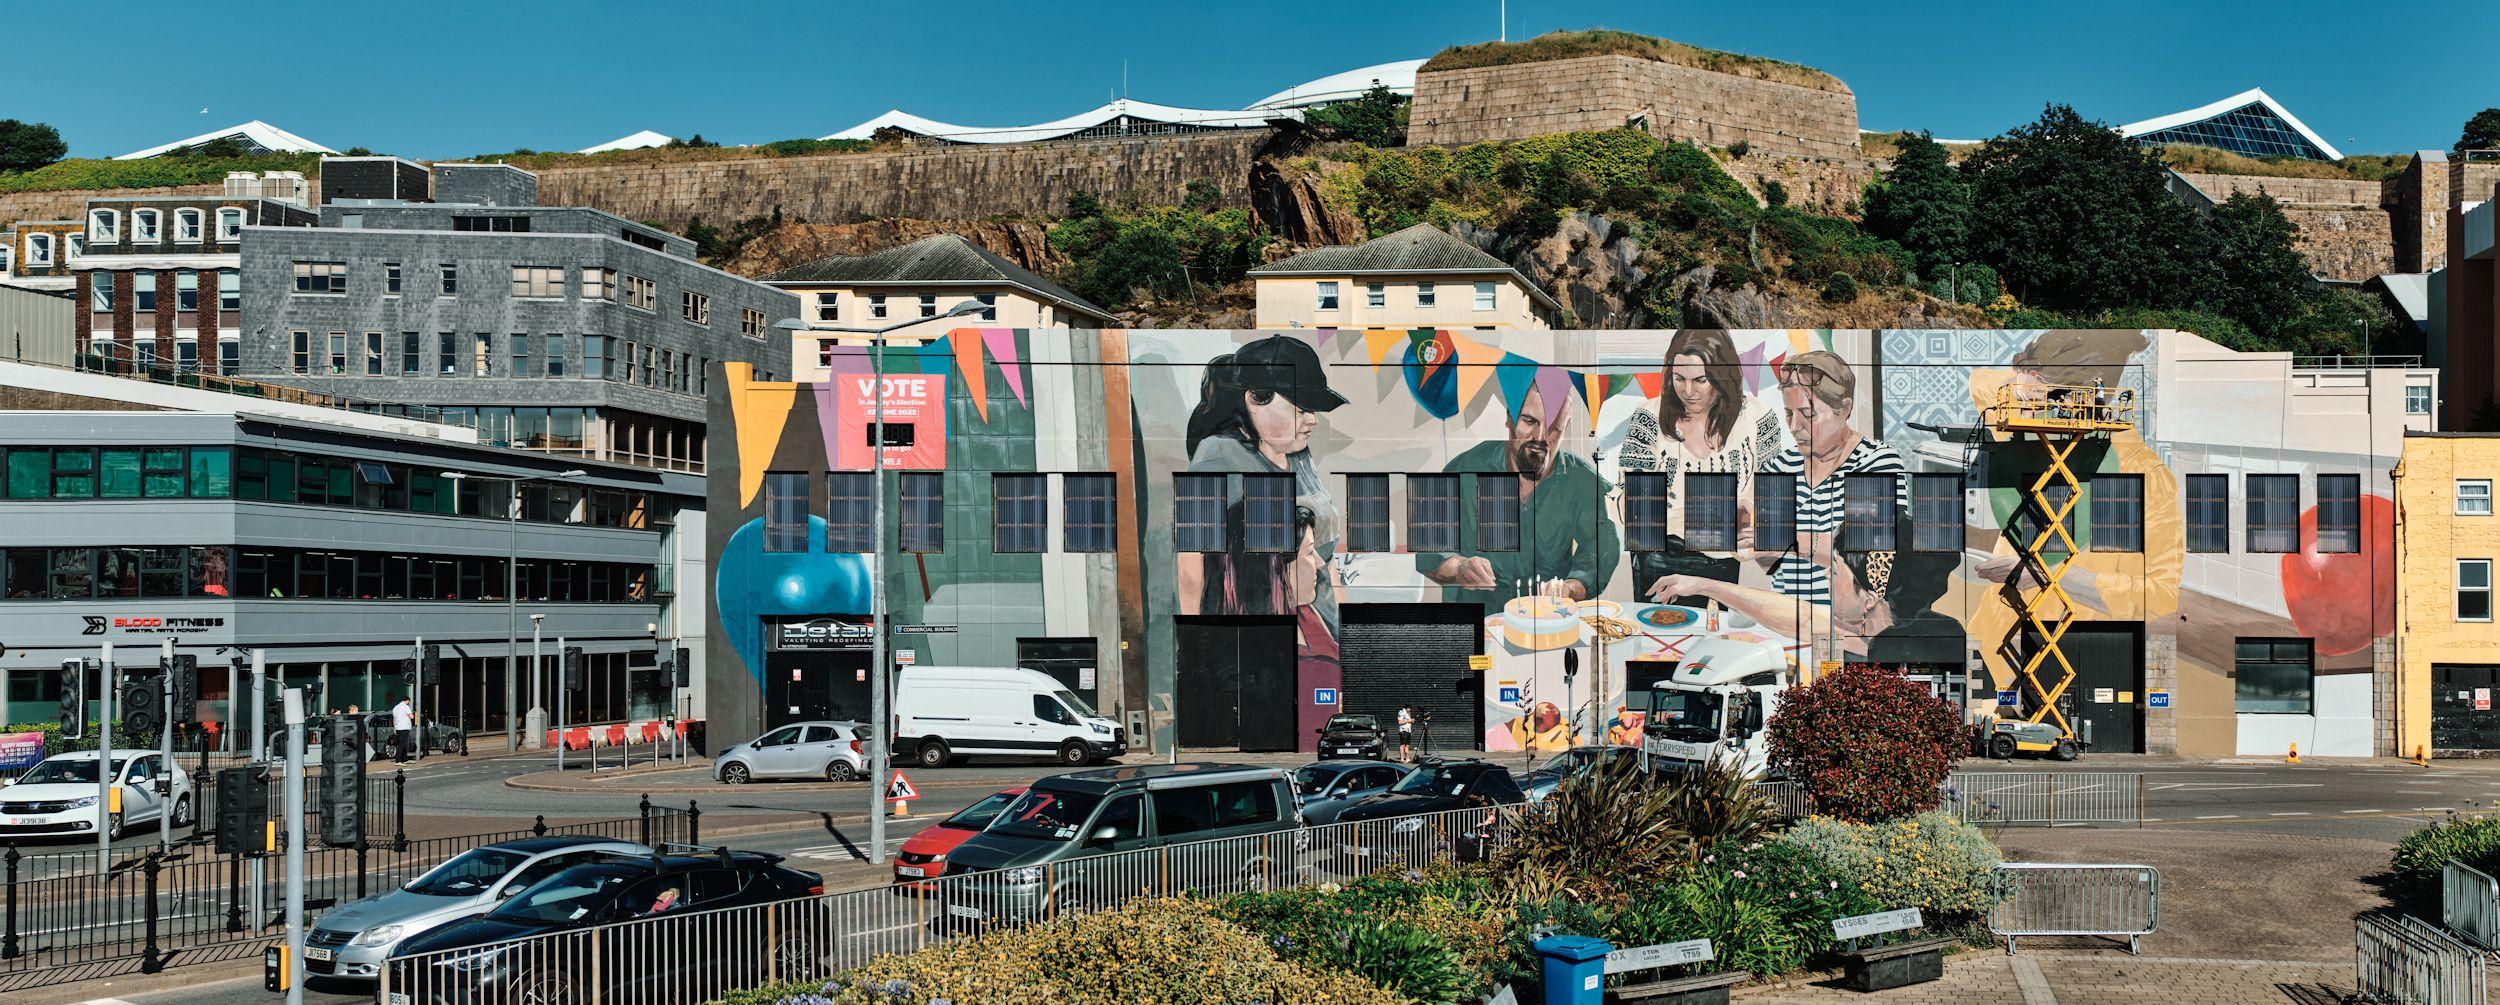 ArtHouse Jersey mural